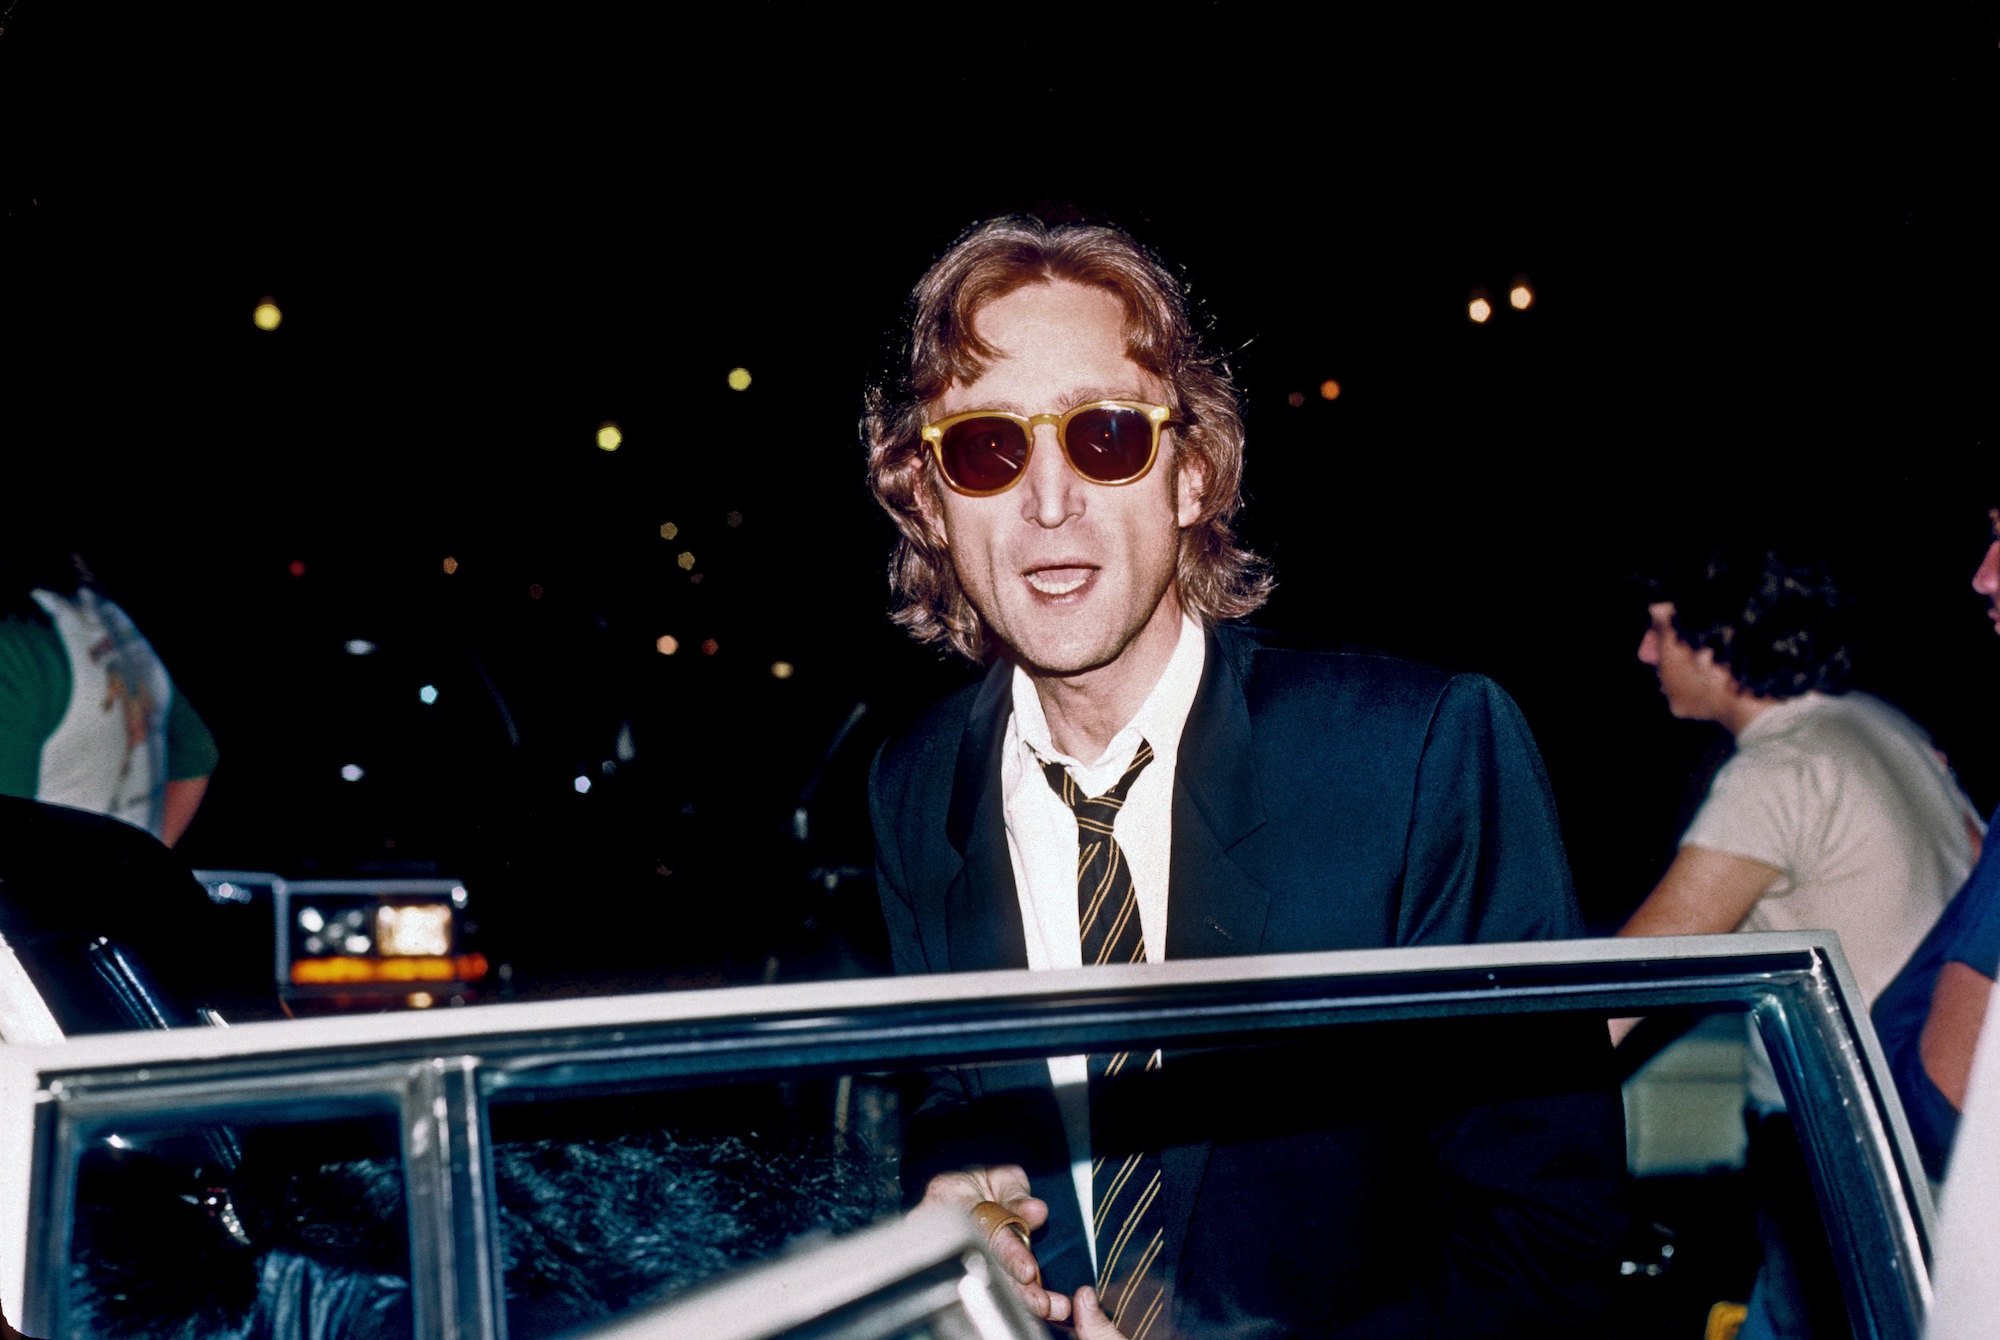 John Lennon Went on a Drug-Fueled Road Trip With Keith Richards and Left With No Memory of It